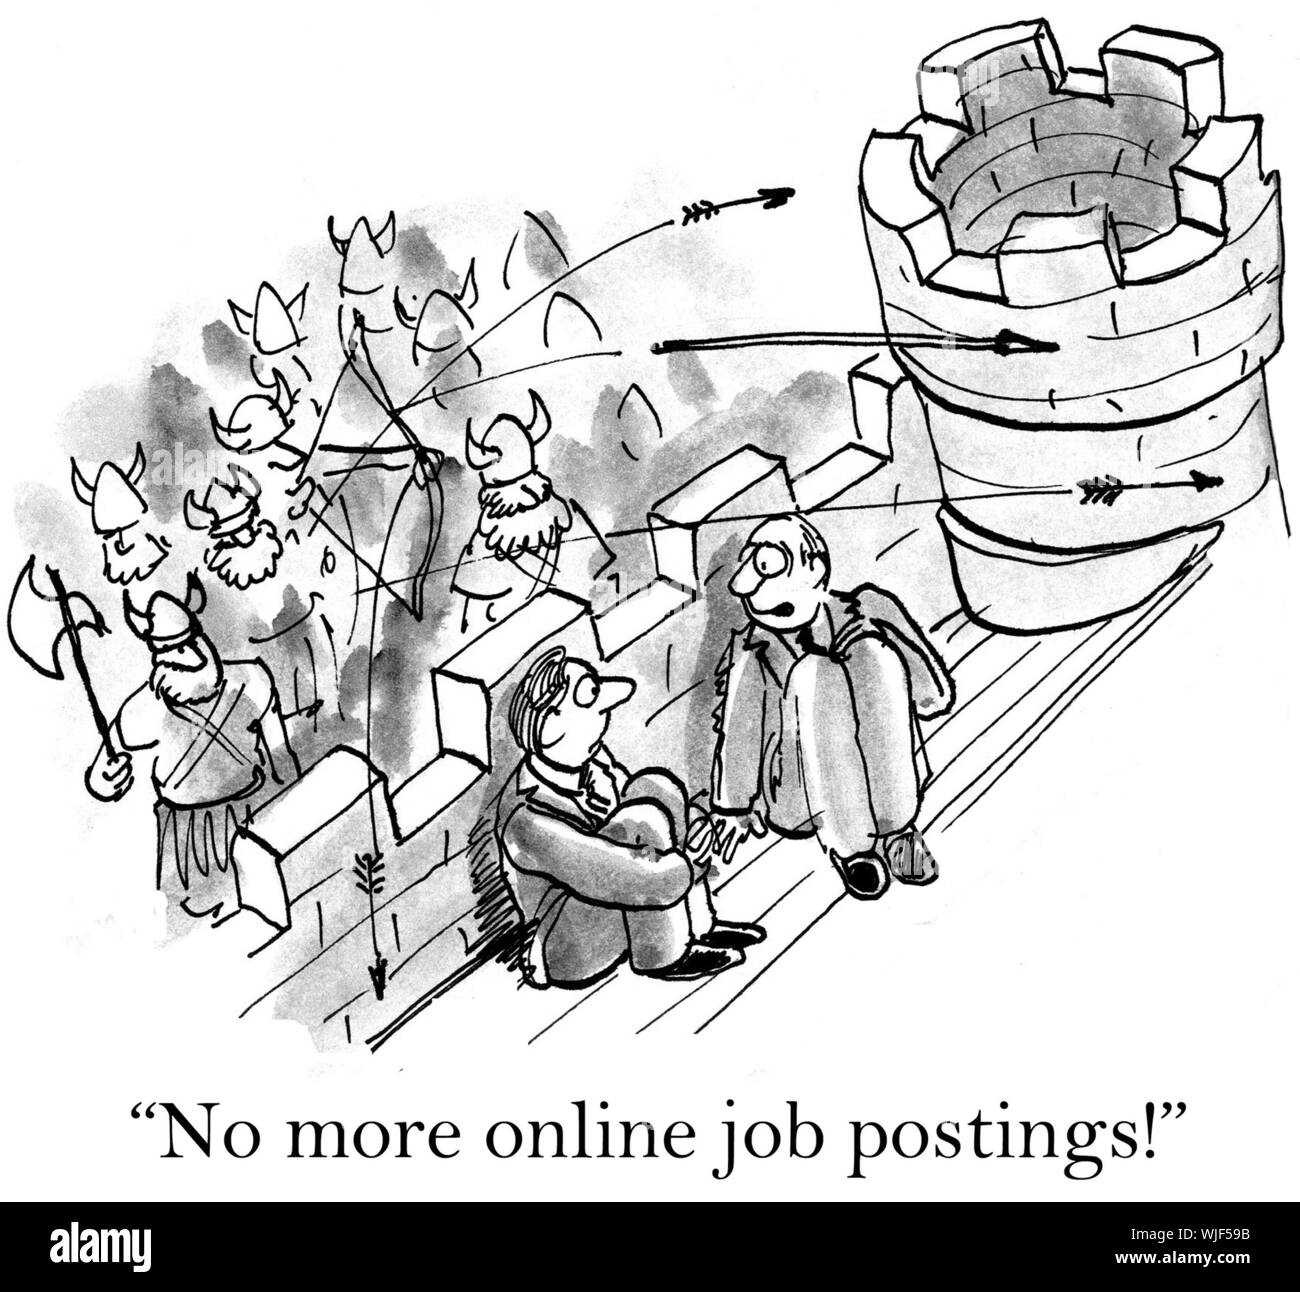 'No more online job postings!' boss under attack. Stock Photo